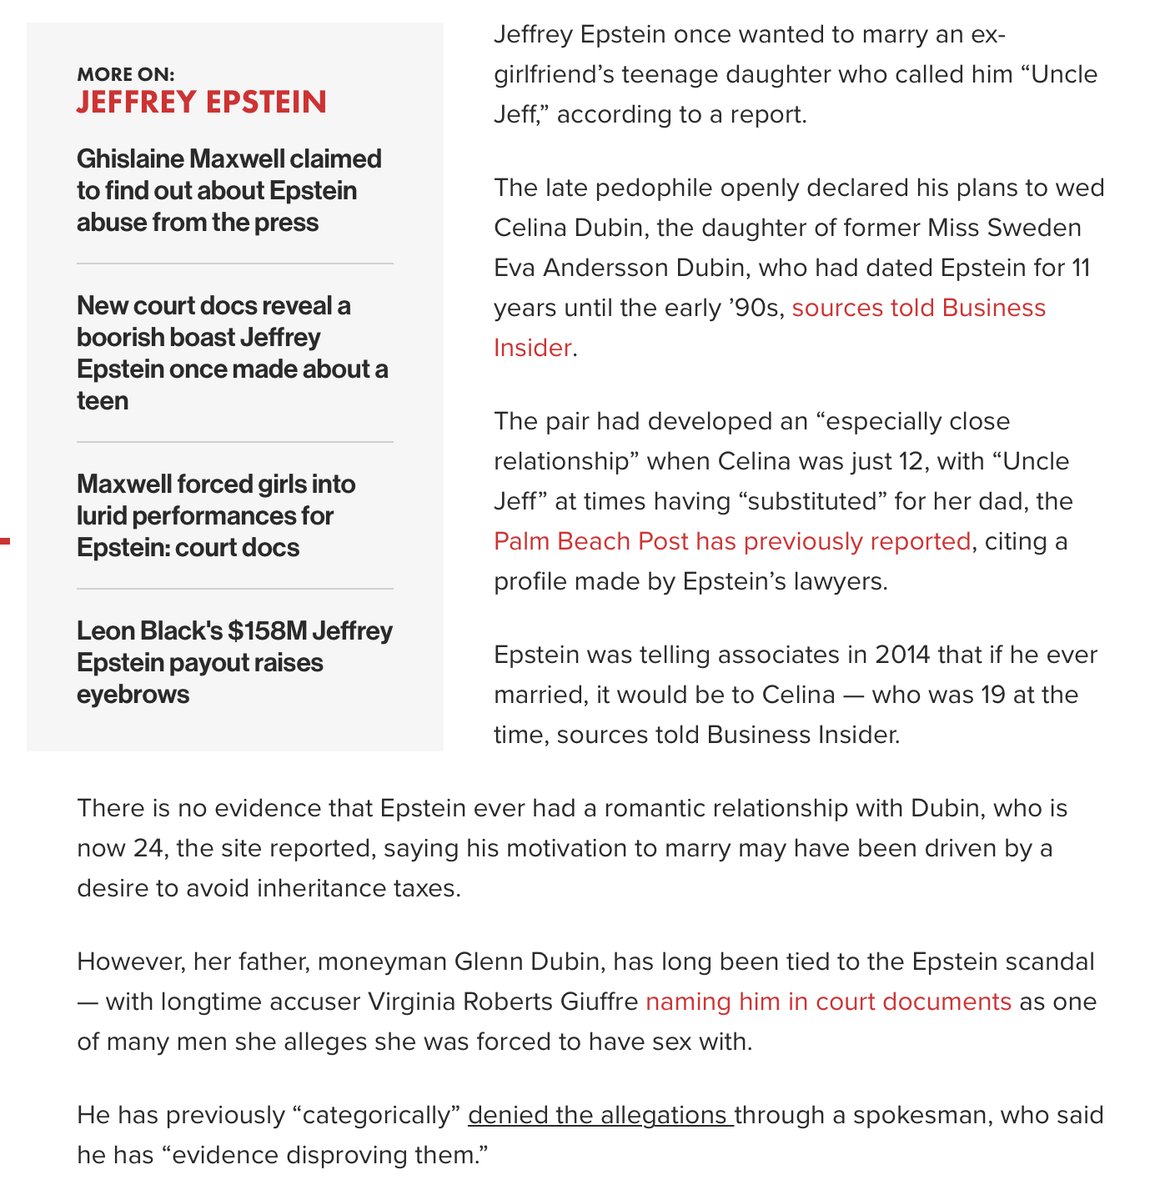 It appears Epstein wanted to marry her daughter and at one point made her the beneficiary to his Trust. And now we have a connection to ‘DNA pioneer’? Microsoft founder. You seriously cannot make up these connections. It’s all the usual disgusting... https://nypost.com/2019/12/18/jeffrey-epstein-wanted-to-marry-ex-girlfriends-teenage-daughter-who-called-him-uncle-jeff/